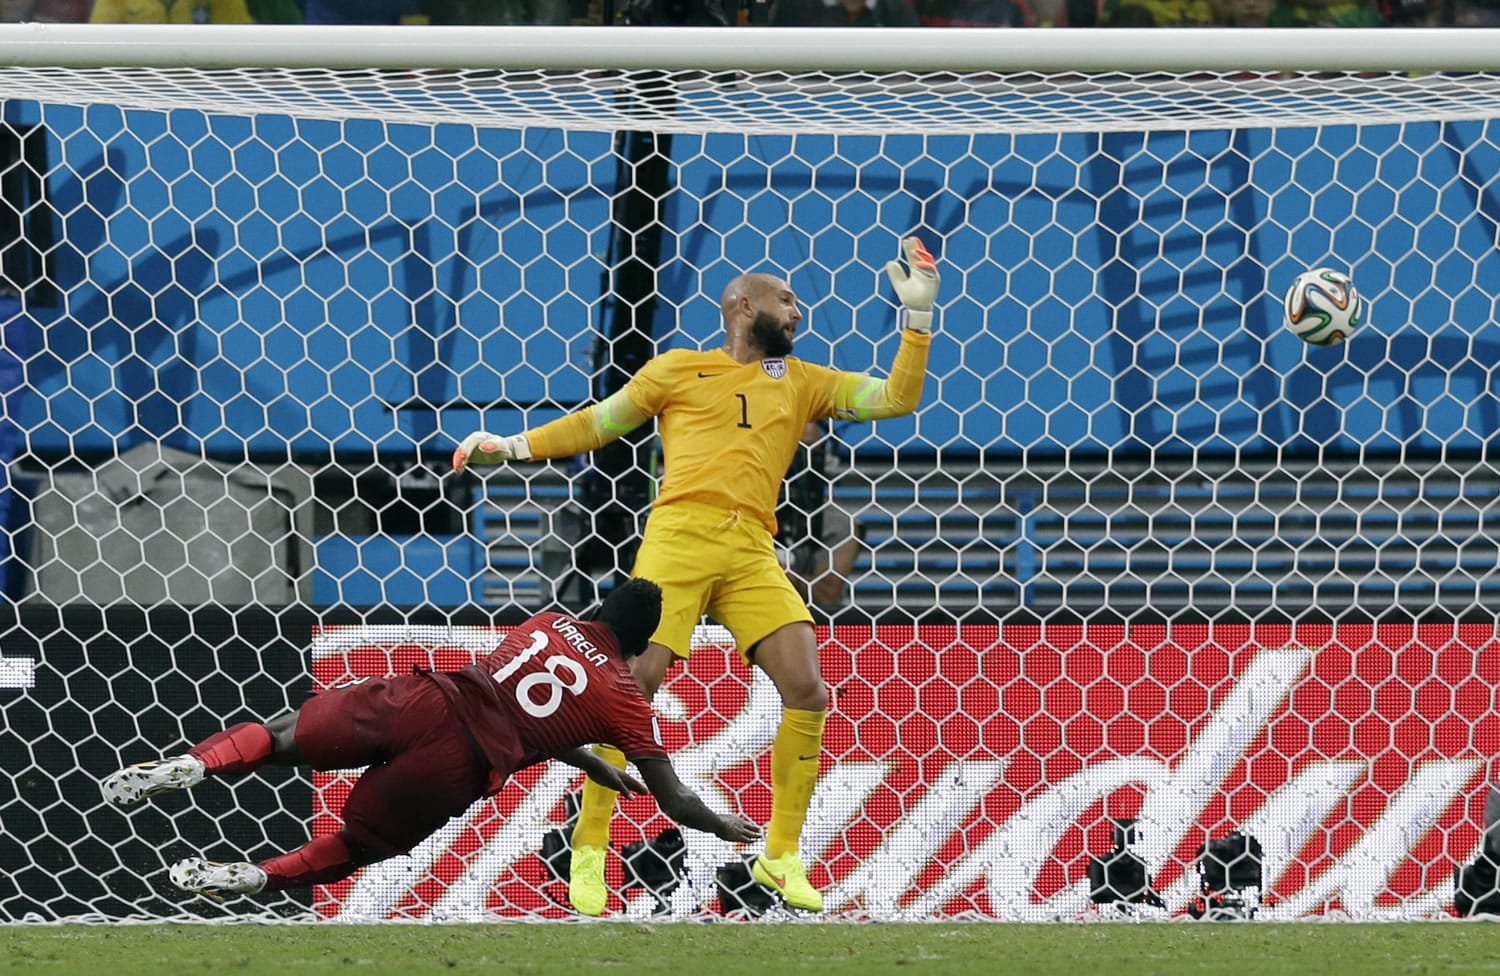 Portugal's Silvestre Varela heads the ball past United States' goalkeeper Tim Howard to score his side's second goal and tie the game 2-2 during the group G World Cup soccer match between the USA and Portugal at the Arena da Amazonia in Manaus, Brazil, Sunday, June 22, 2014.